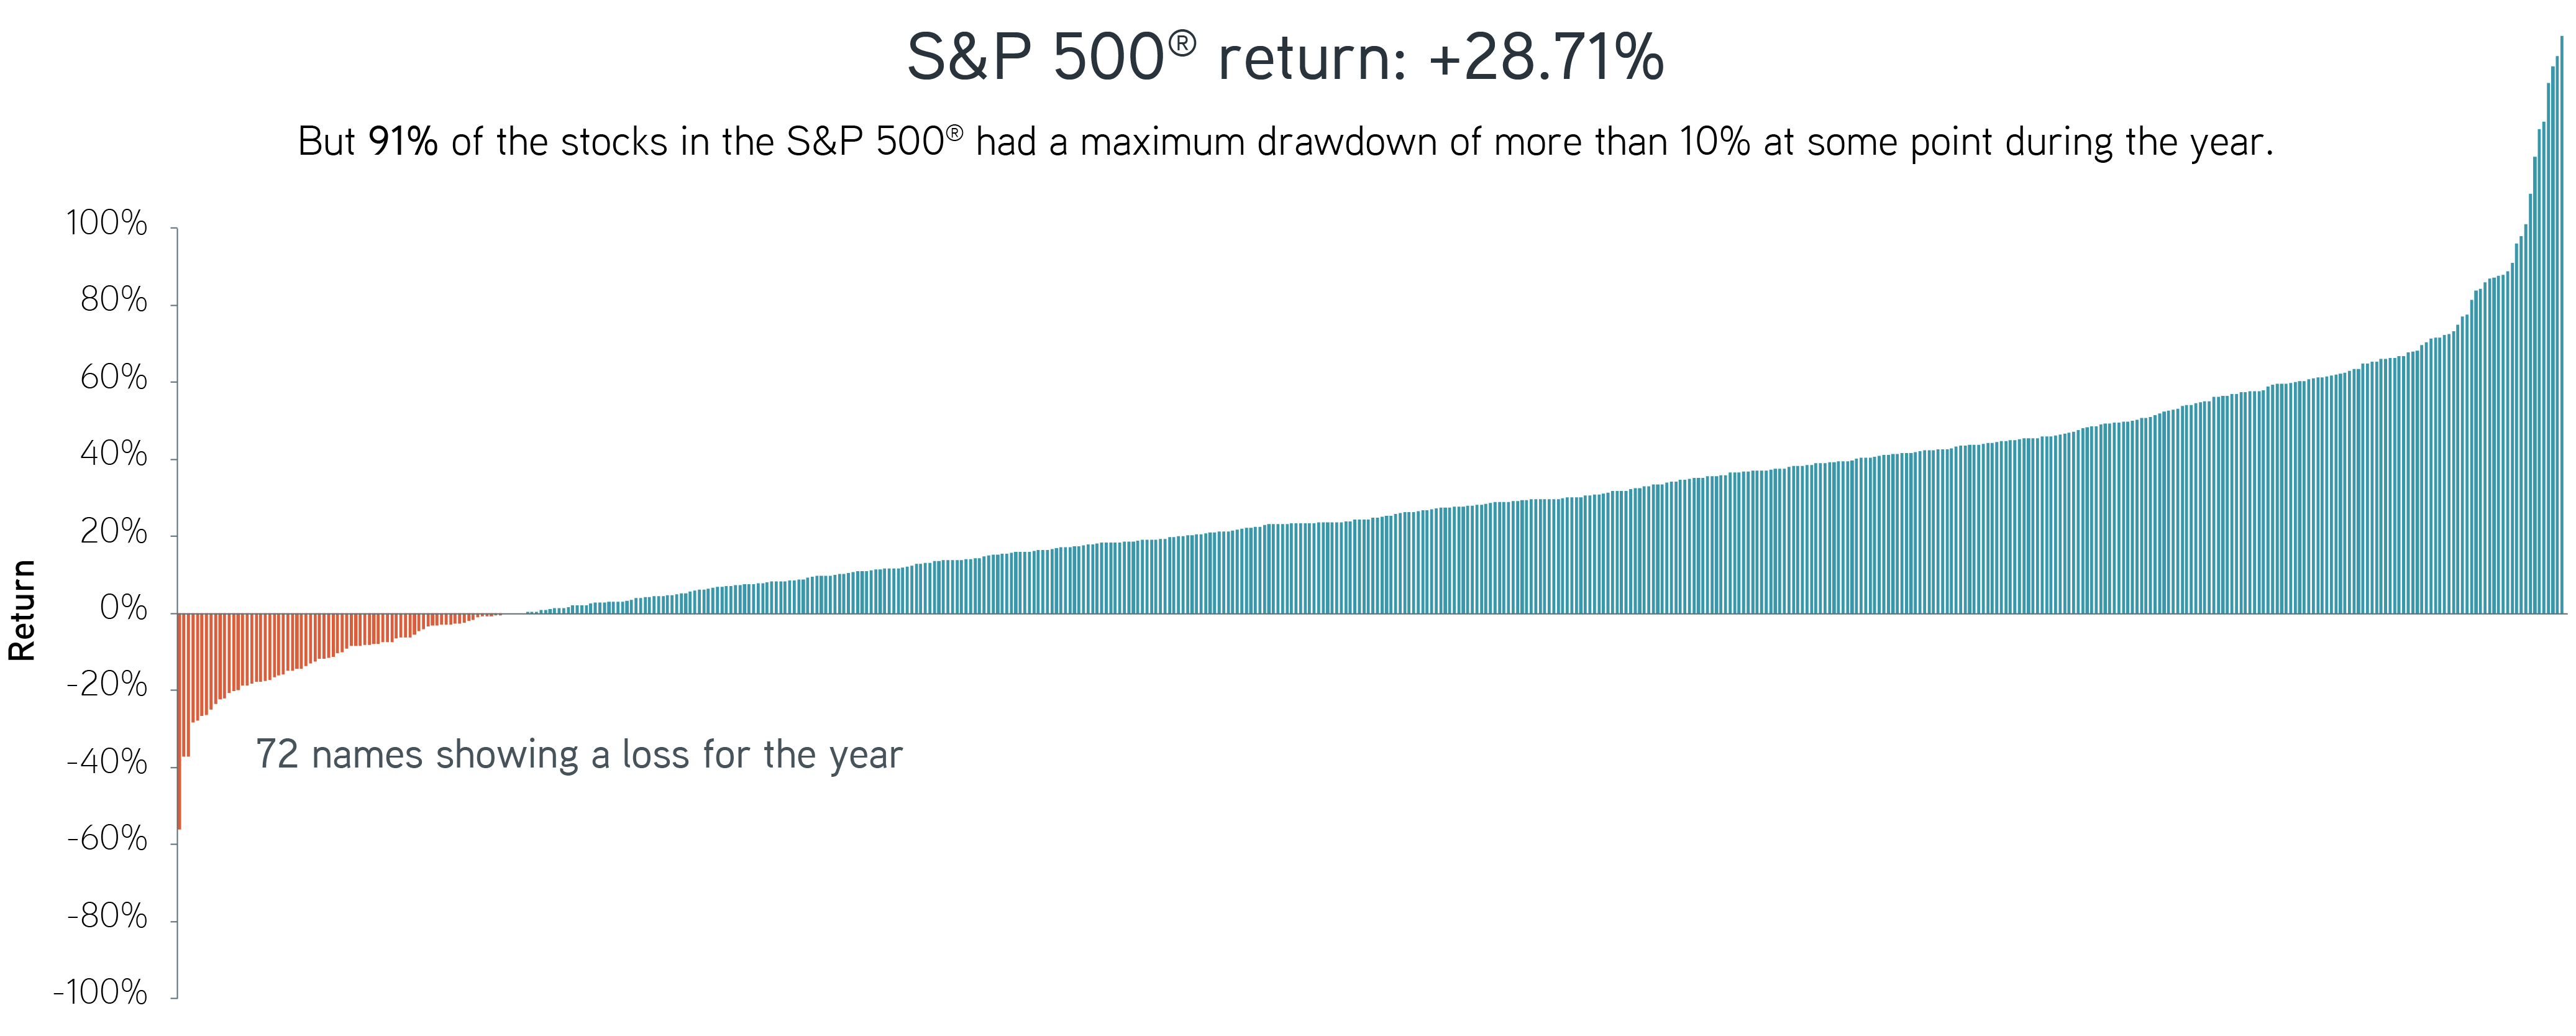 91% of the stocks in the S&P 500 had a maximum drawdown of more than 10% at some point during the year.